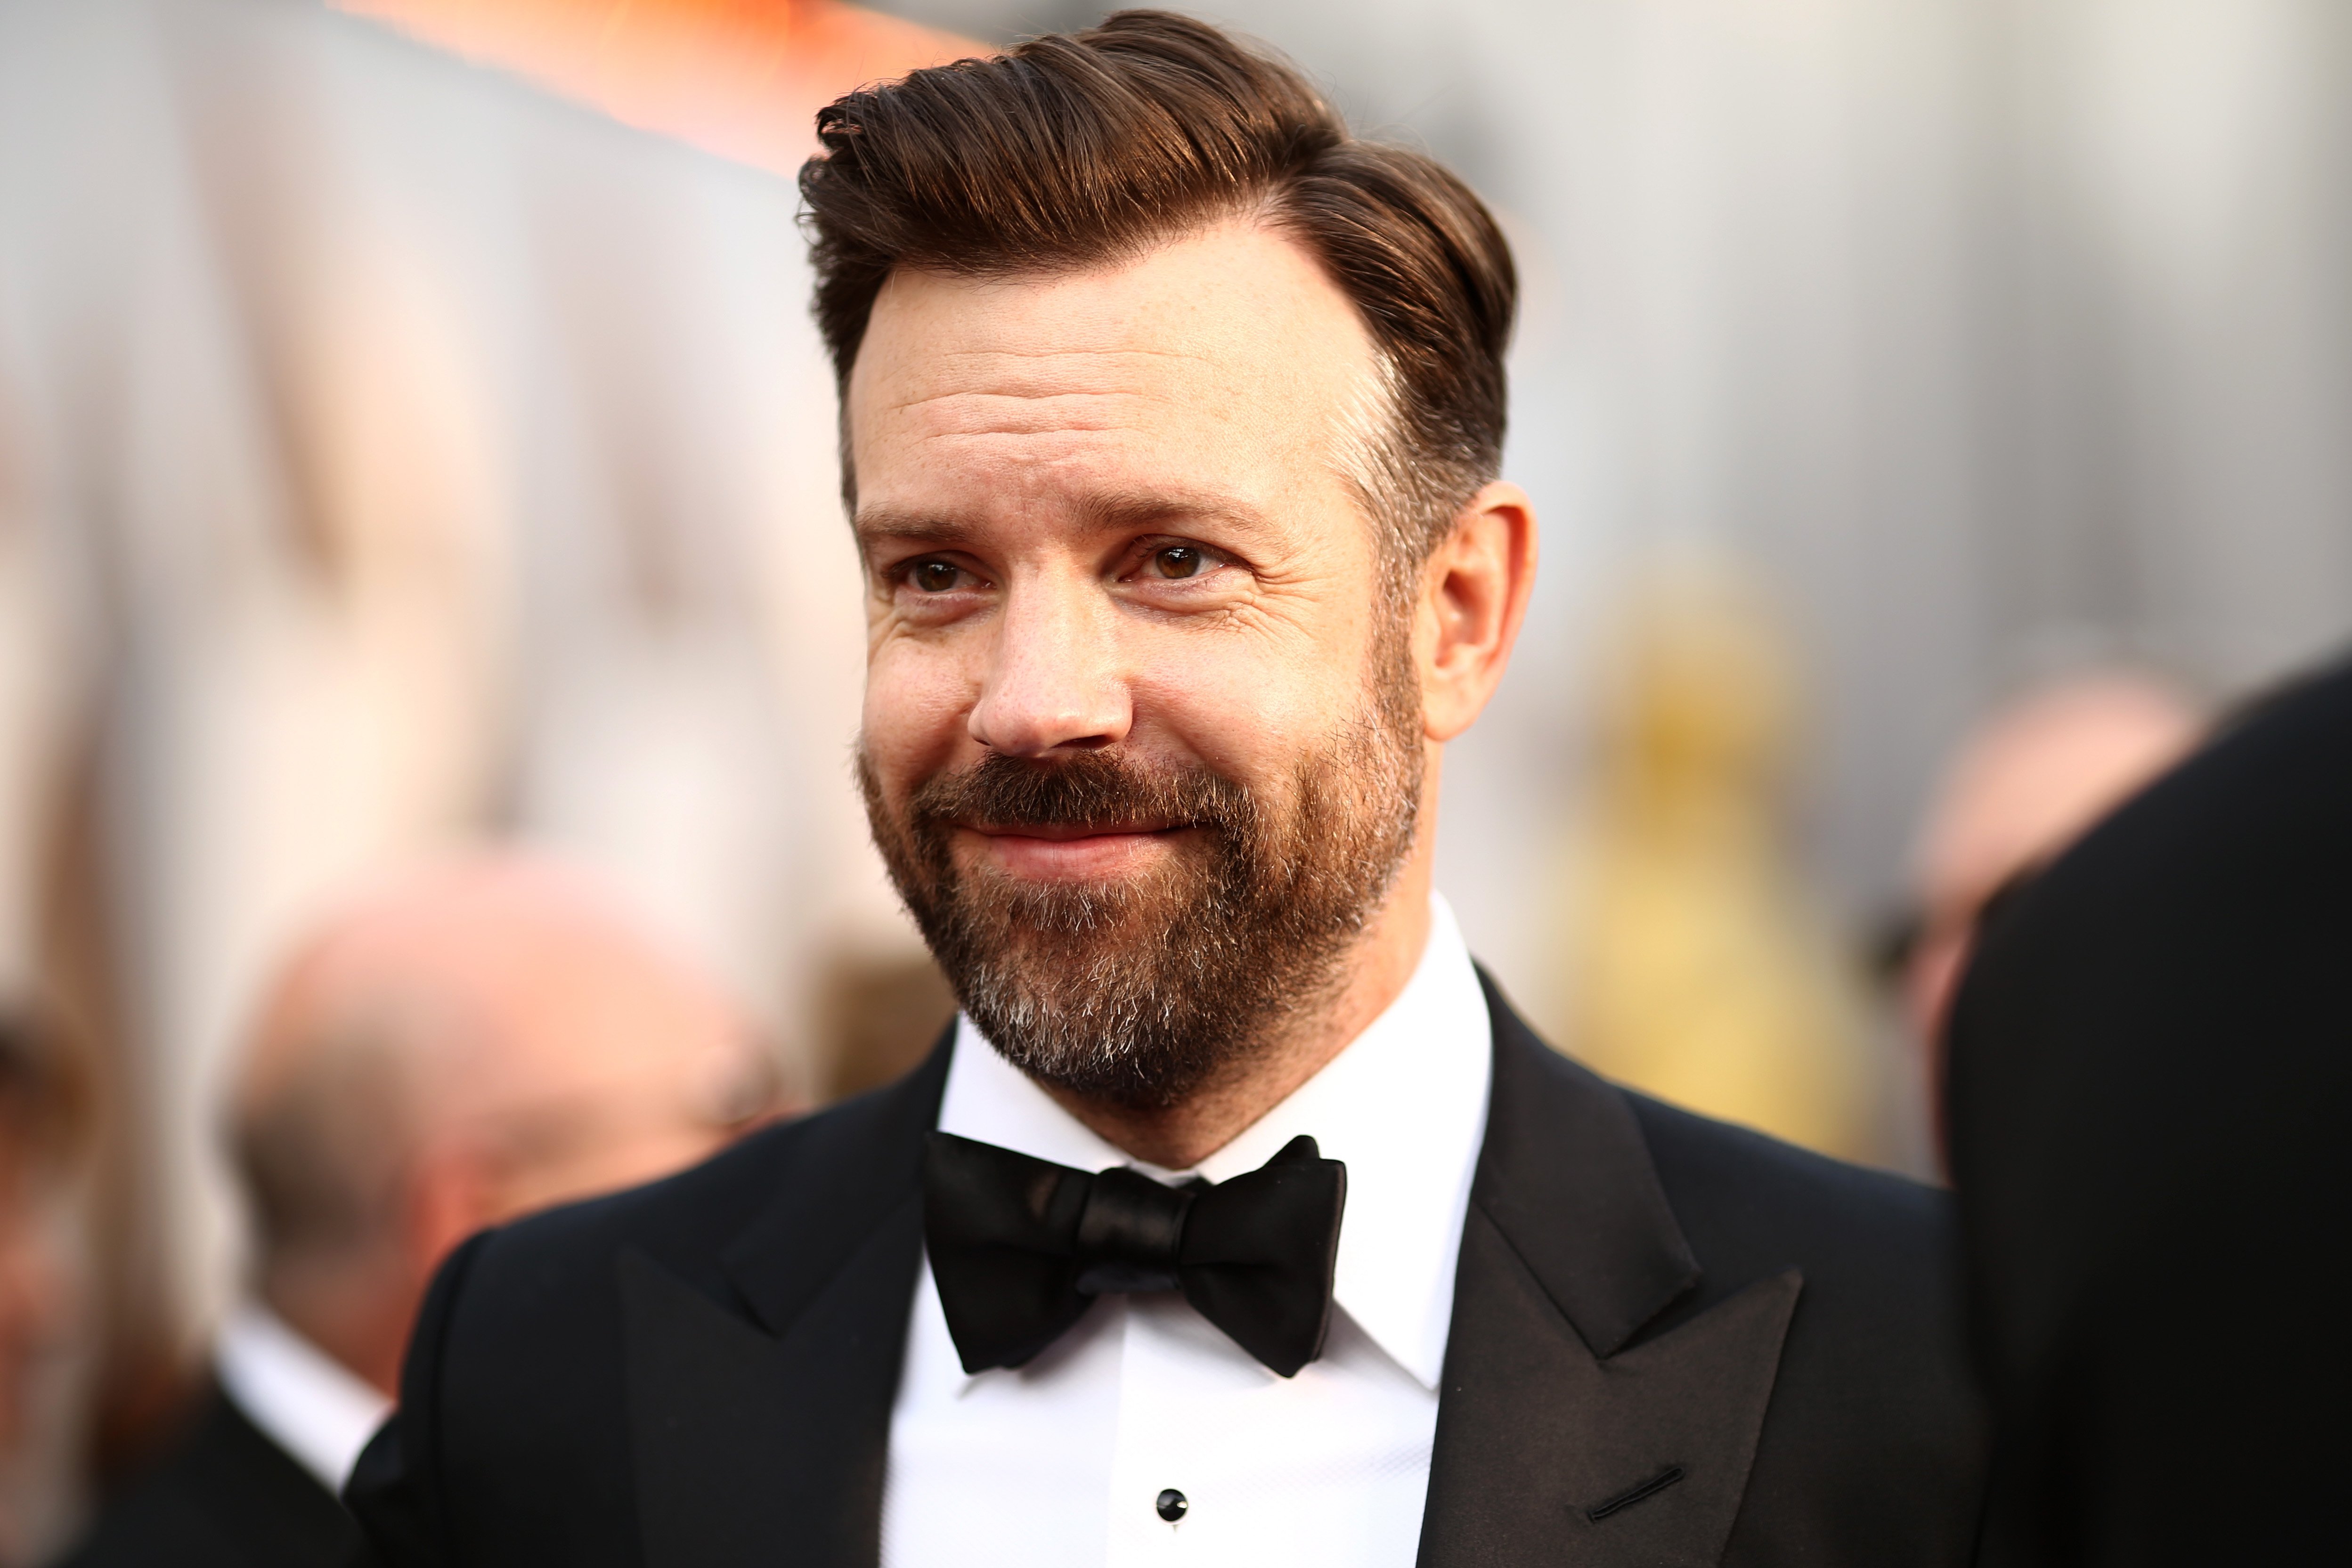 Jason Sudeikis smiles for a photo on the red carpet